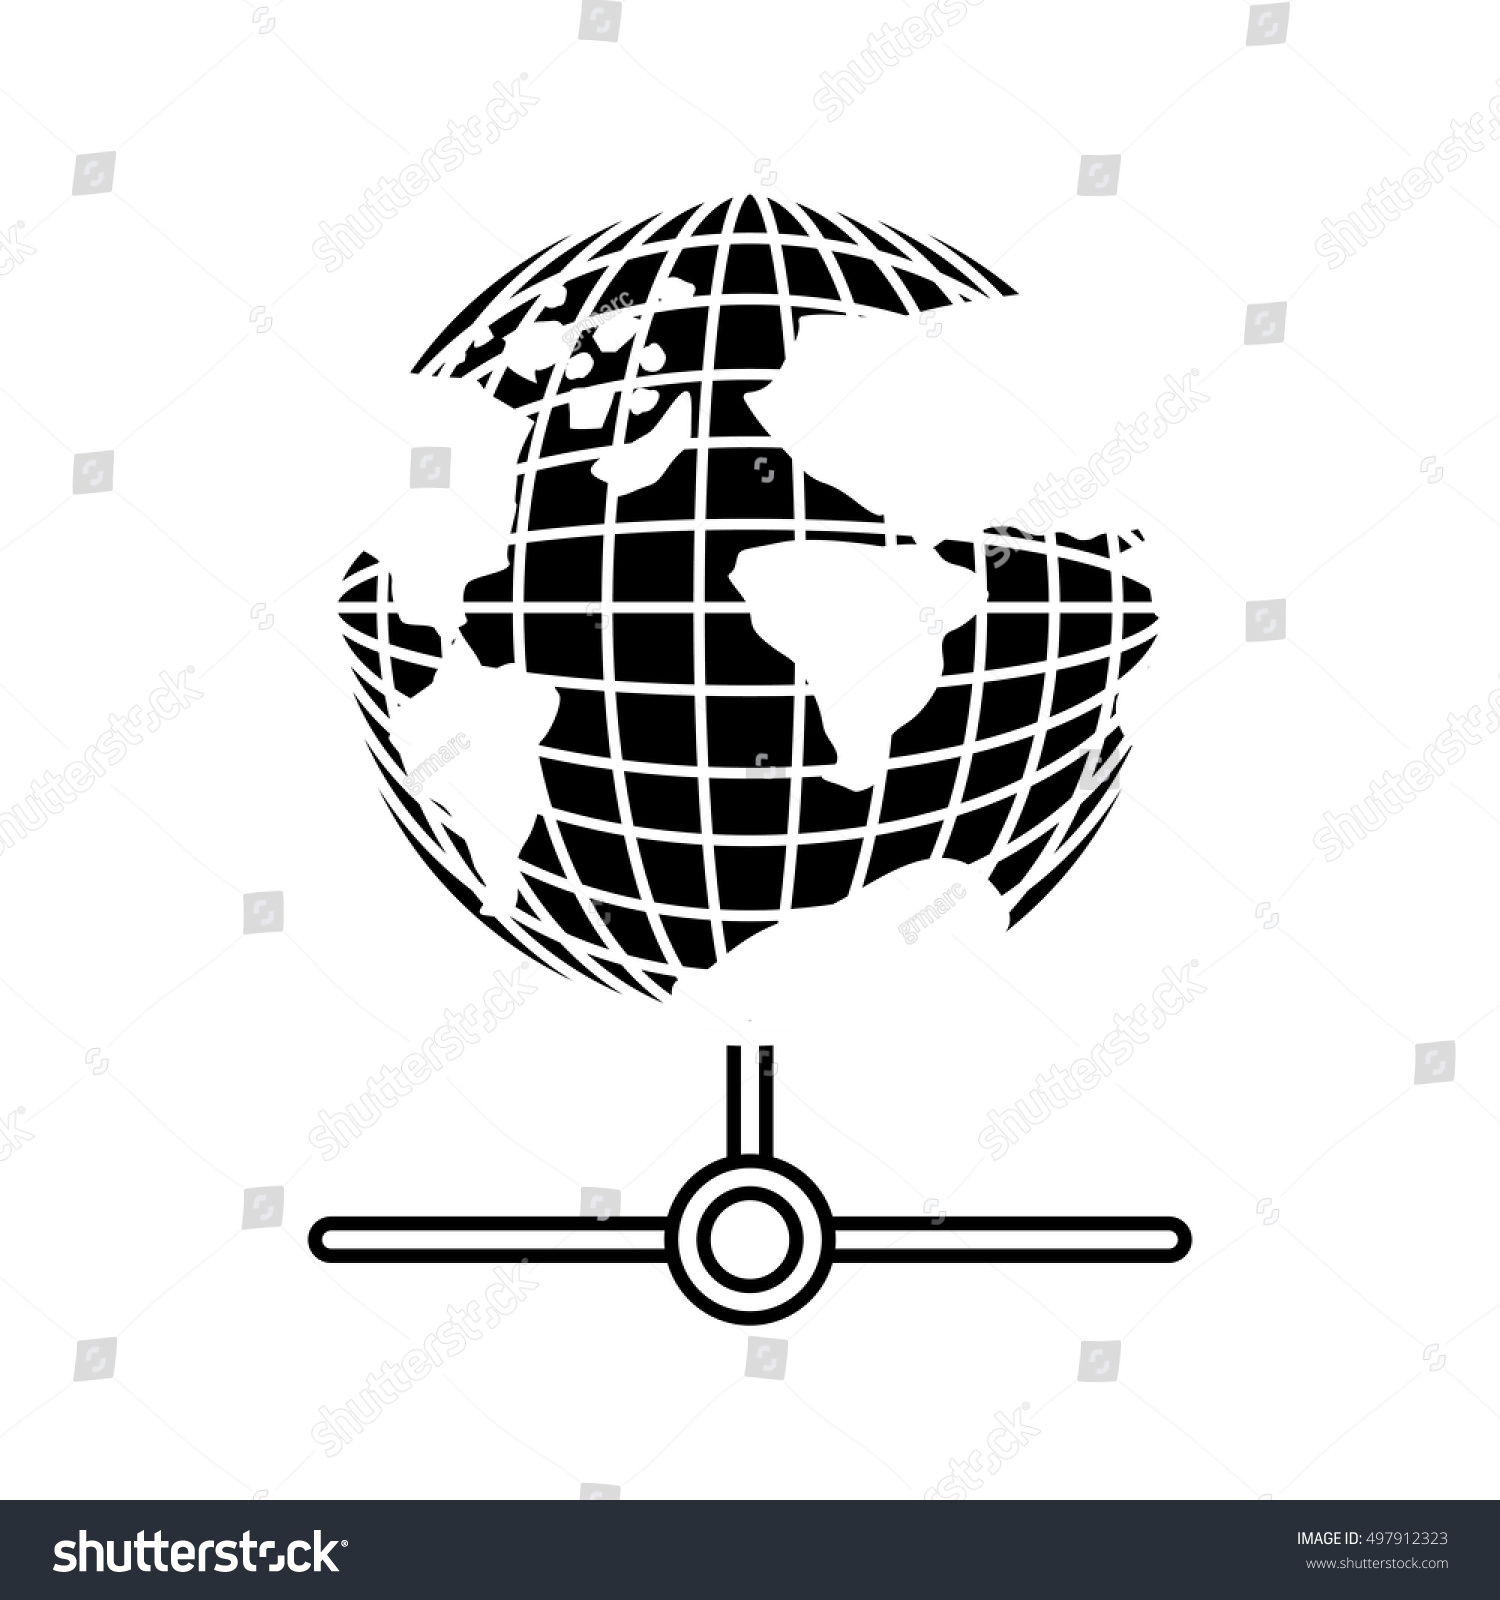 Silhouette Earth World Map Continents Stock Vector (Royalty Free ...